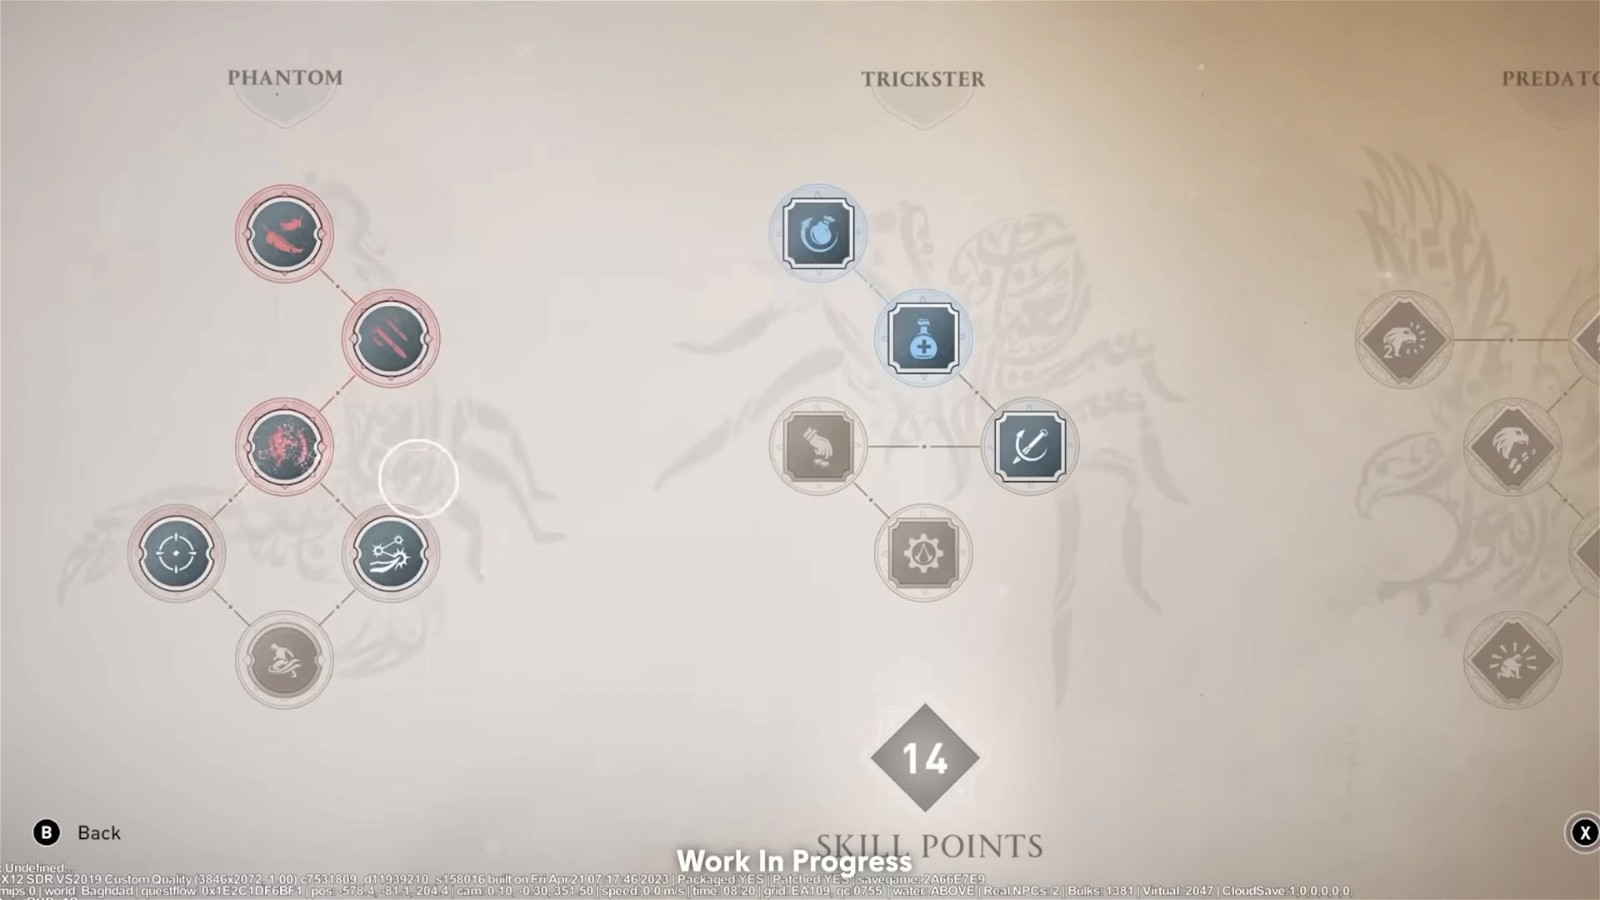 Assassin’s Creed Mirage Continues the Trend of Cursor Menus in Console Games